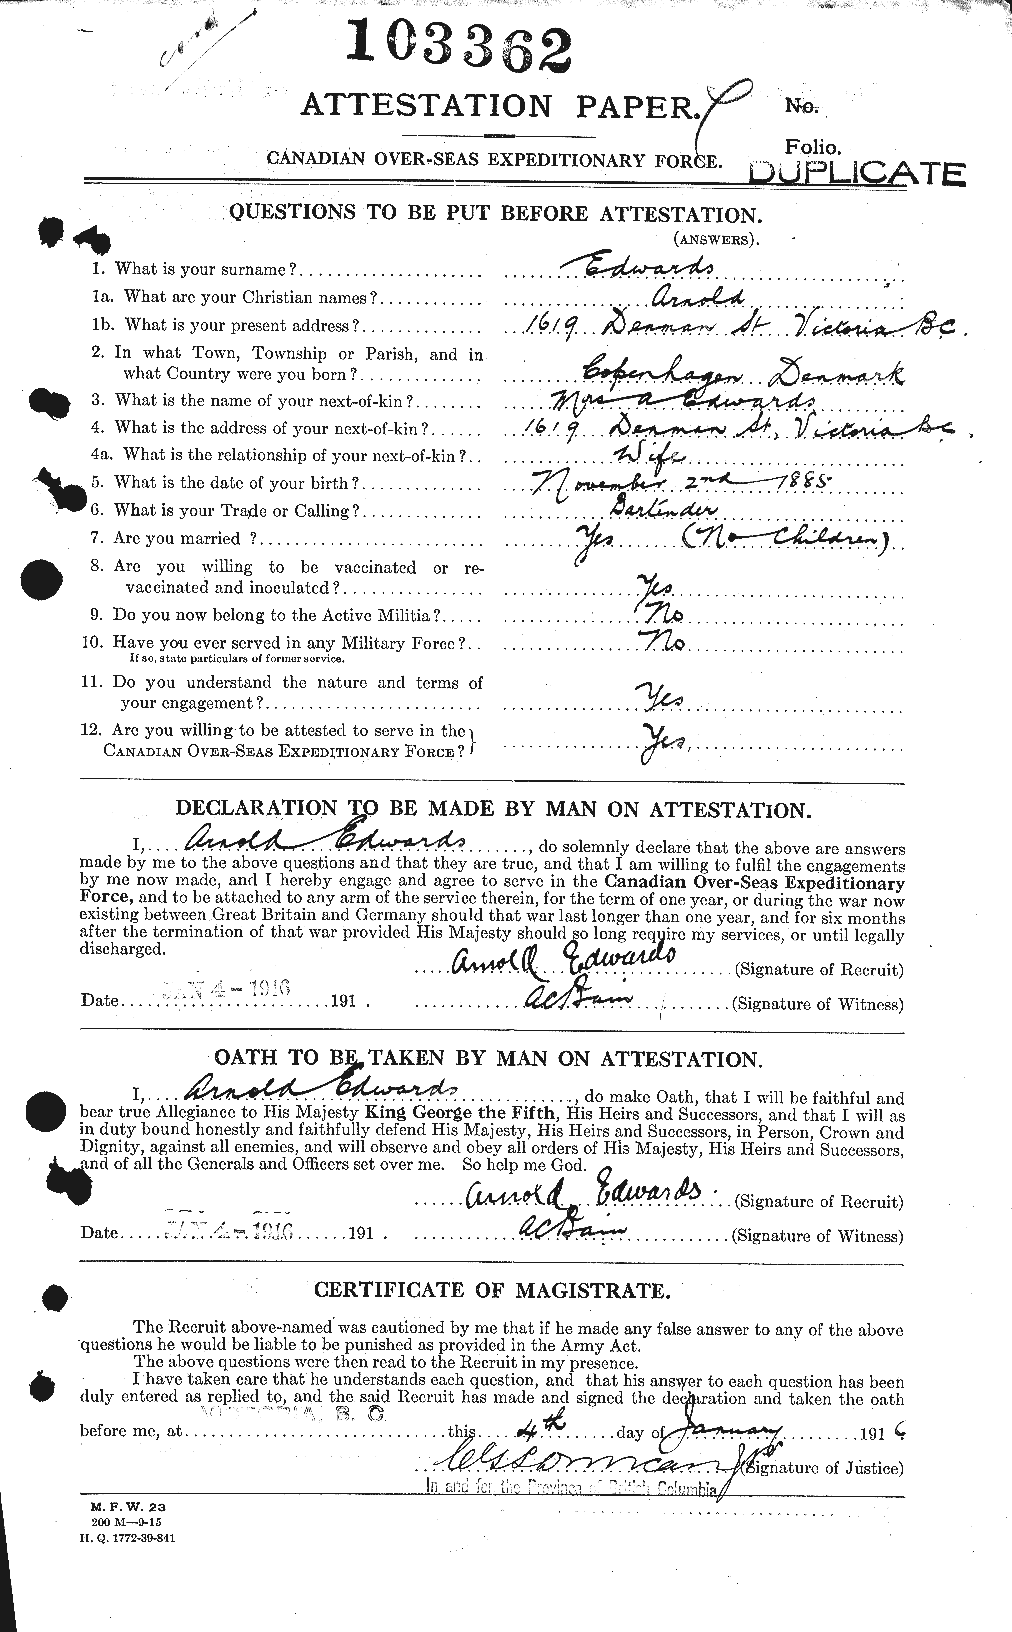 Personnel Records of the First World War - CEF 313122a